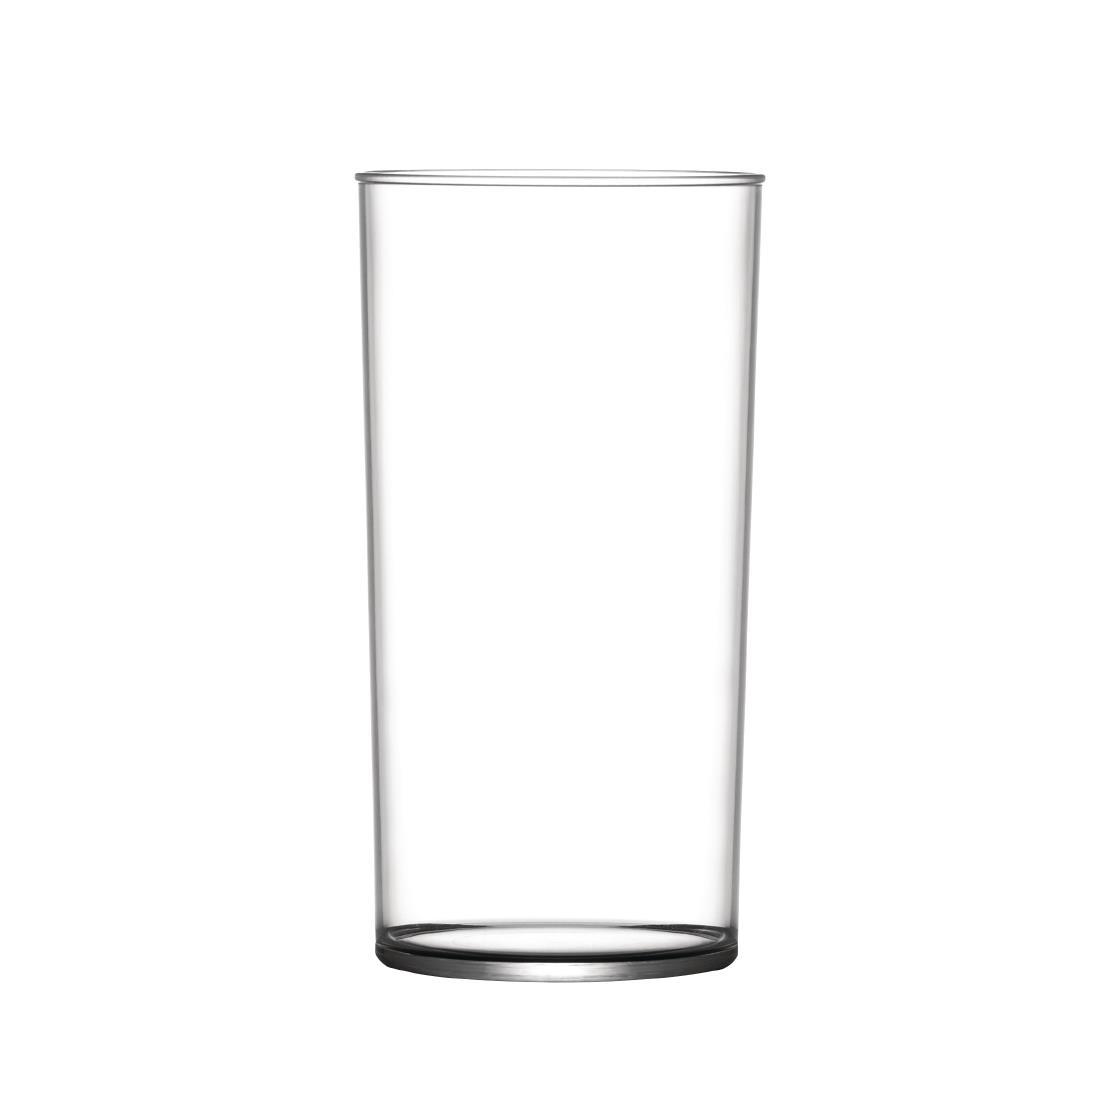 BBP Polycarbonate Hi Ball Glasses 285ml CE Marked (Pack of 48) - CE666  - 1